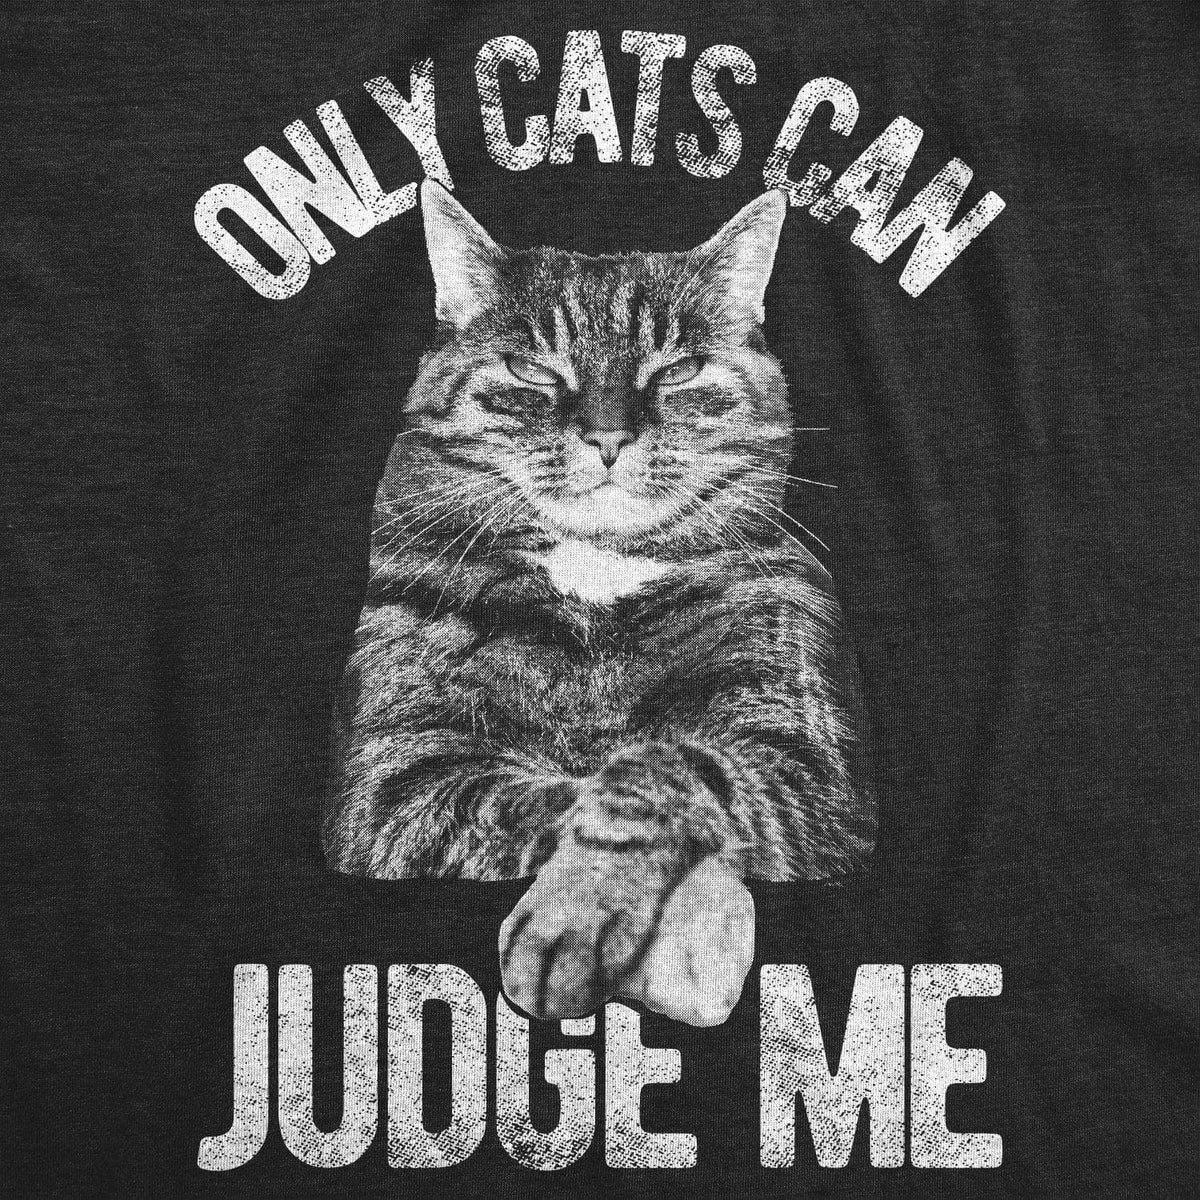 Only Cats Can Judge Me Women&#39;s Tshirt  -  Crazy Dog T-Shirts